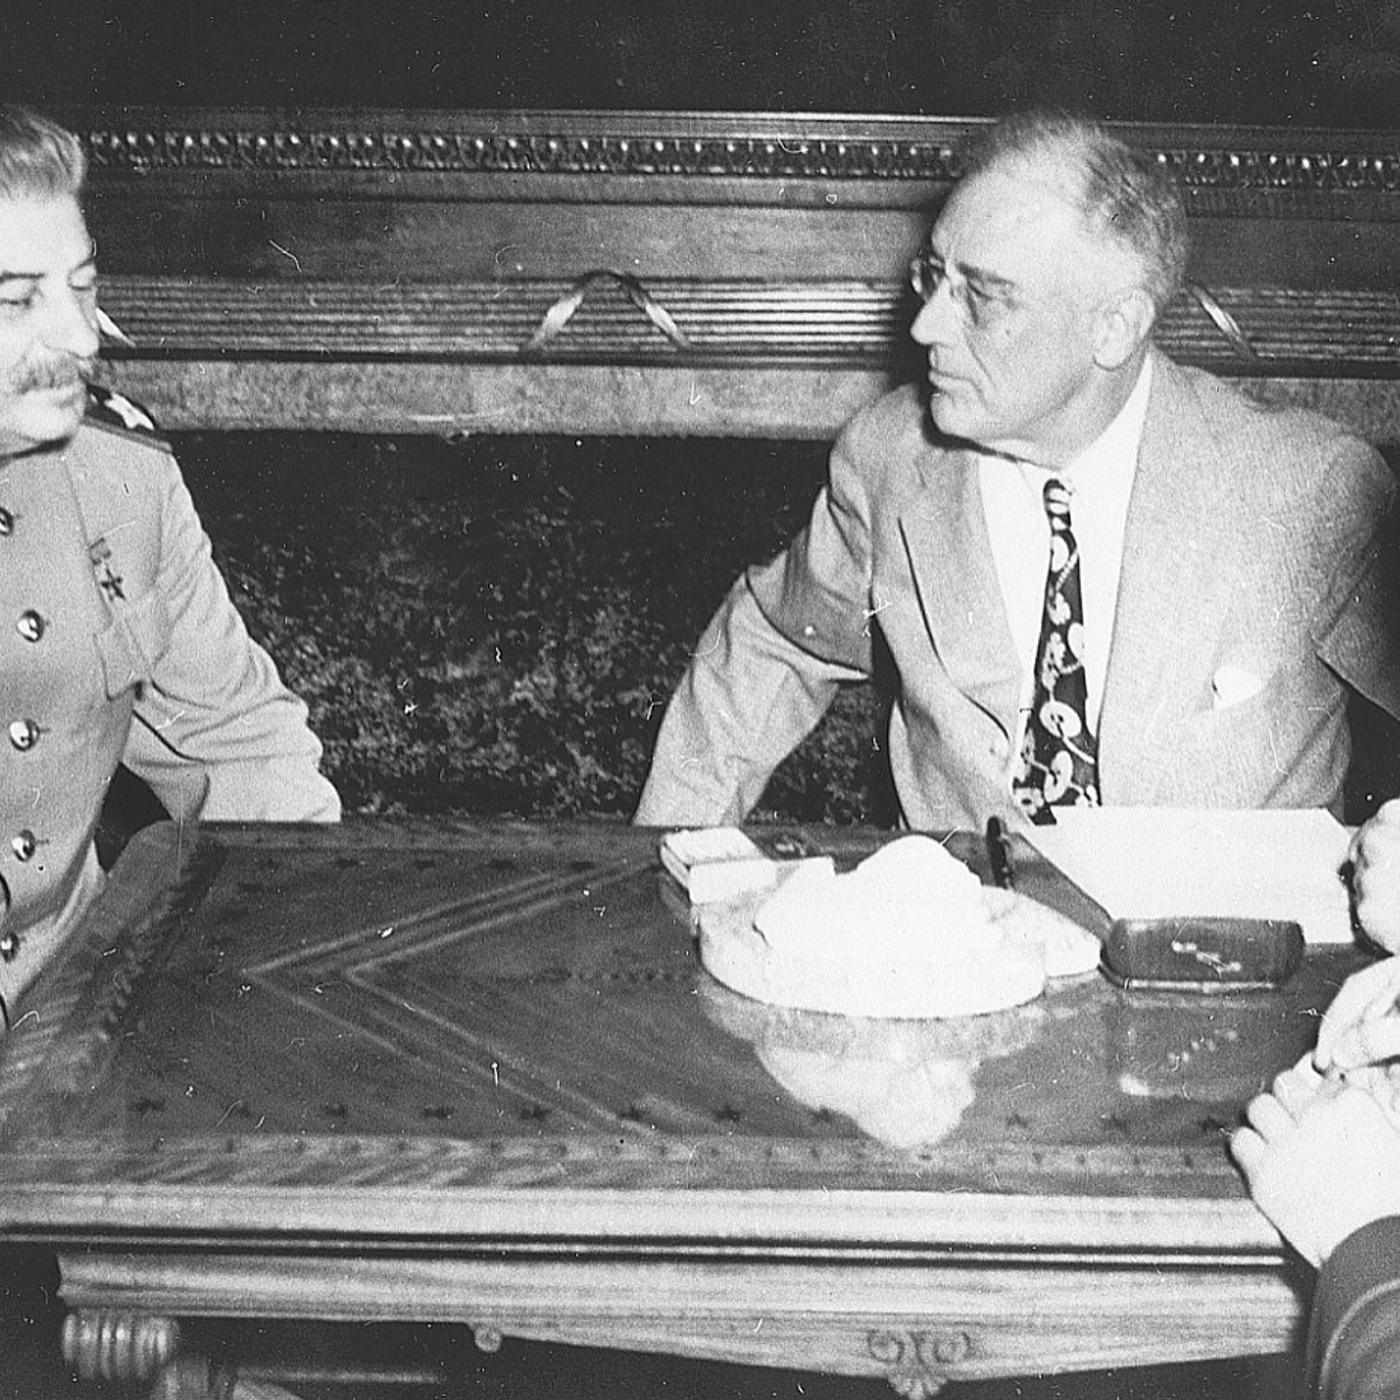 PREVIEW: #STALIN: Conversation with author Sean McMeekin about his book 